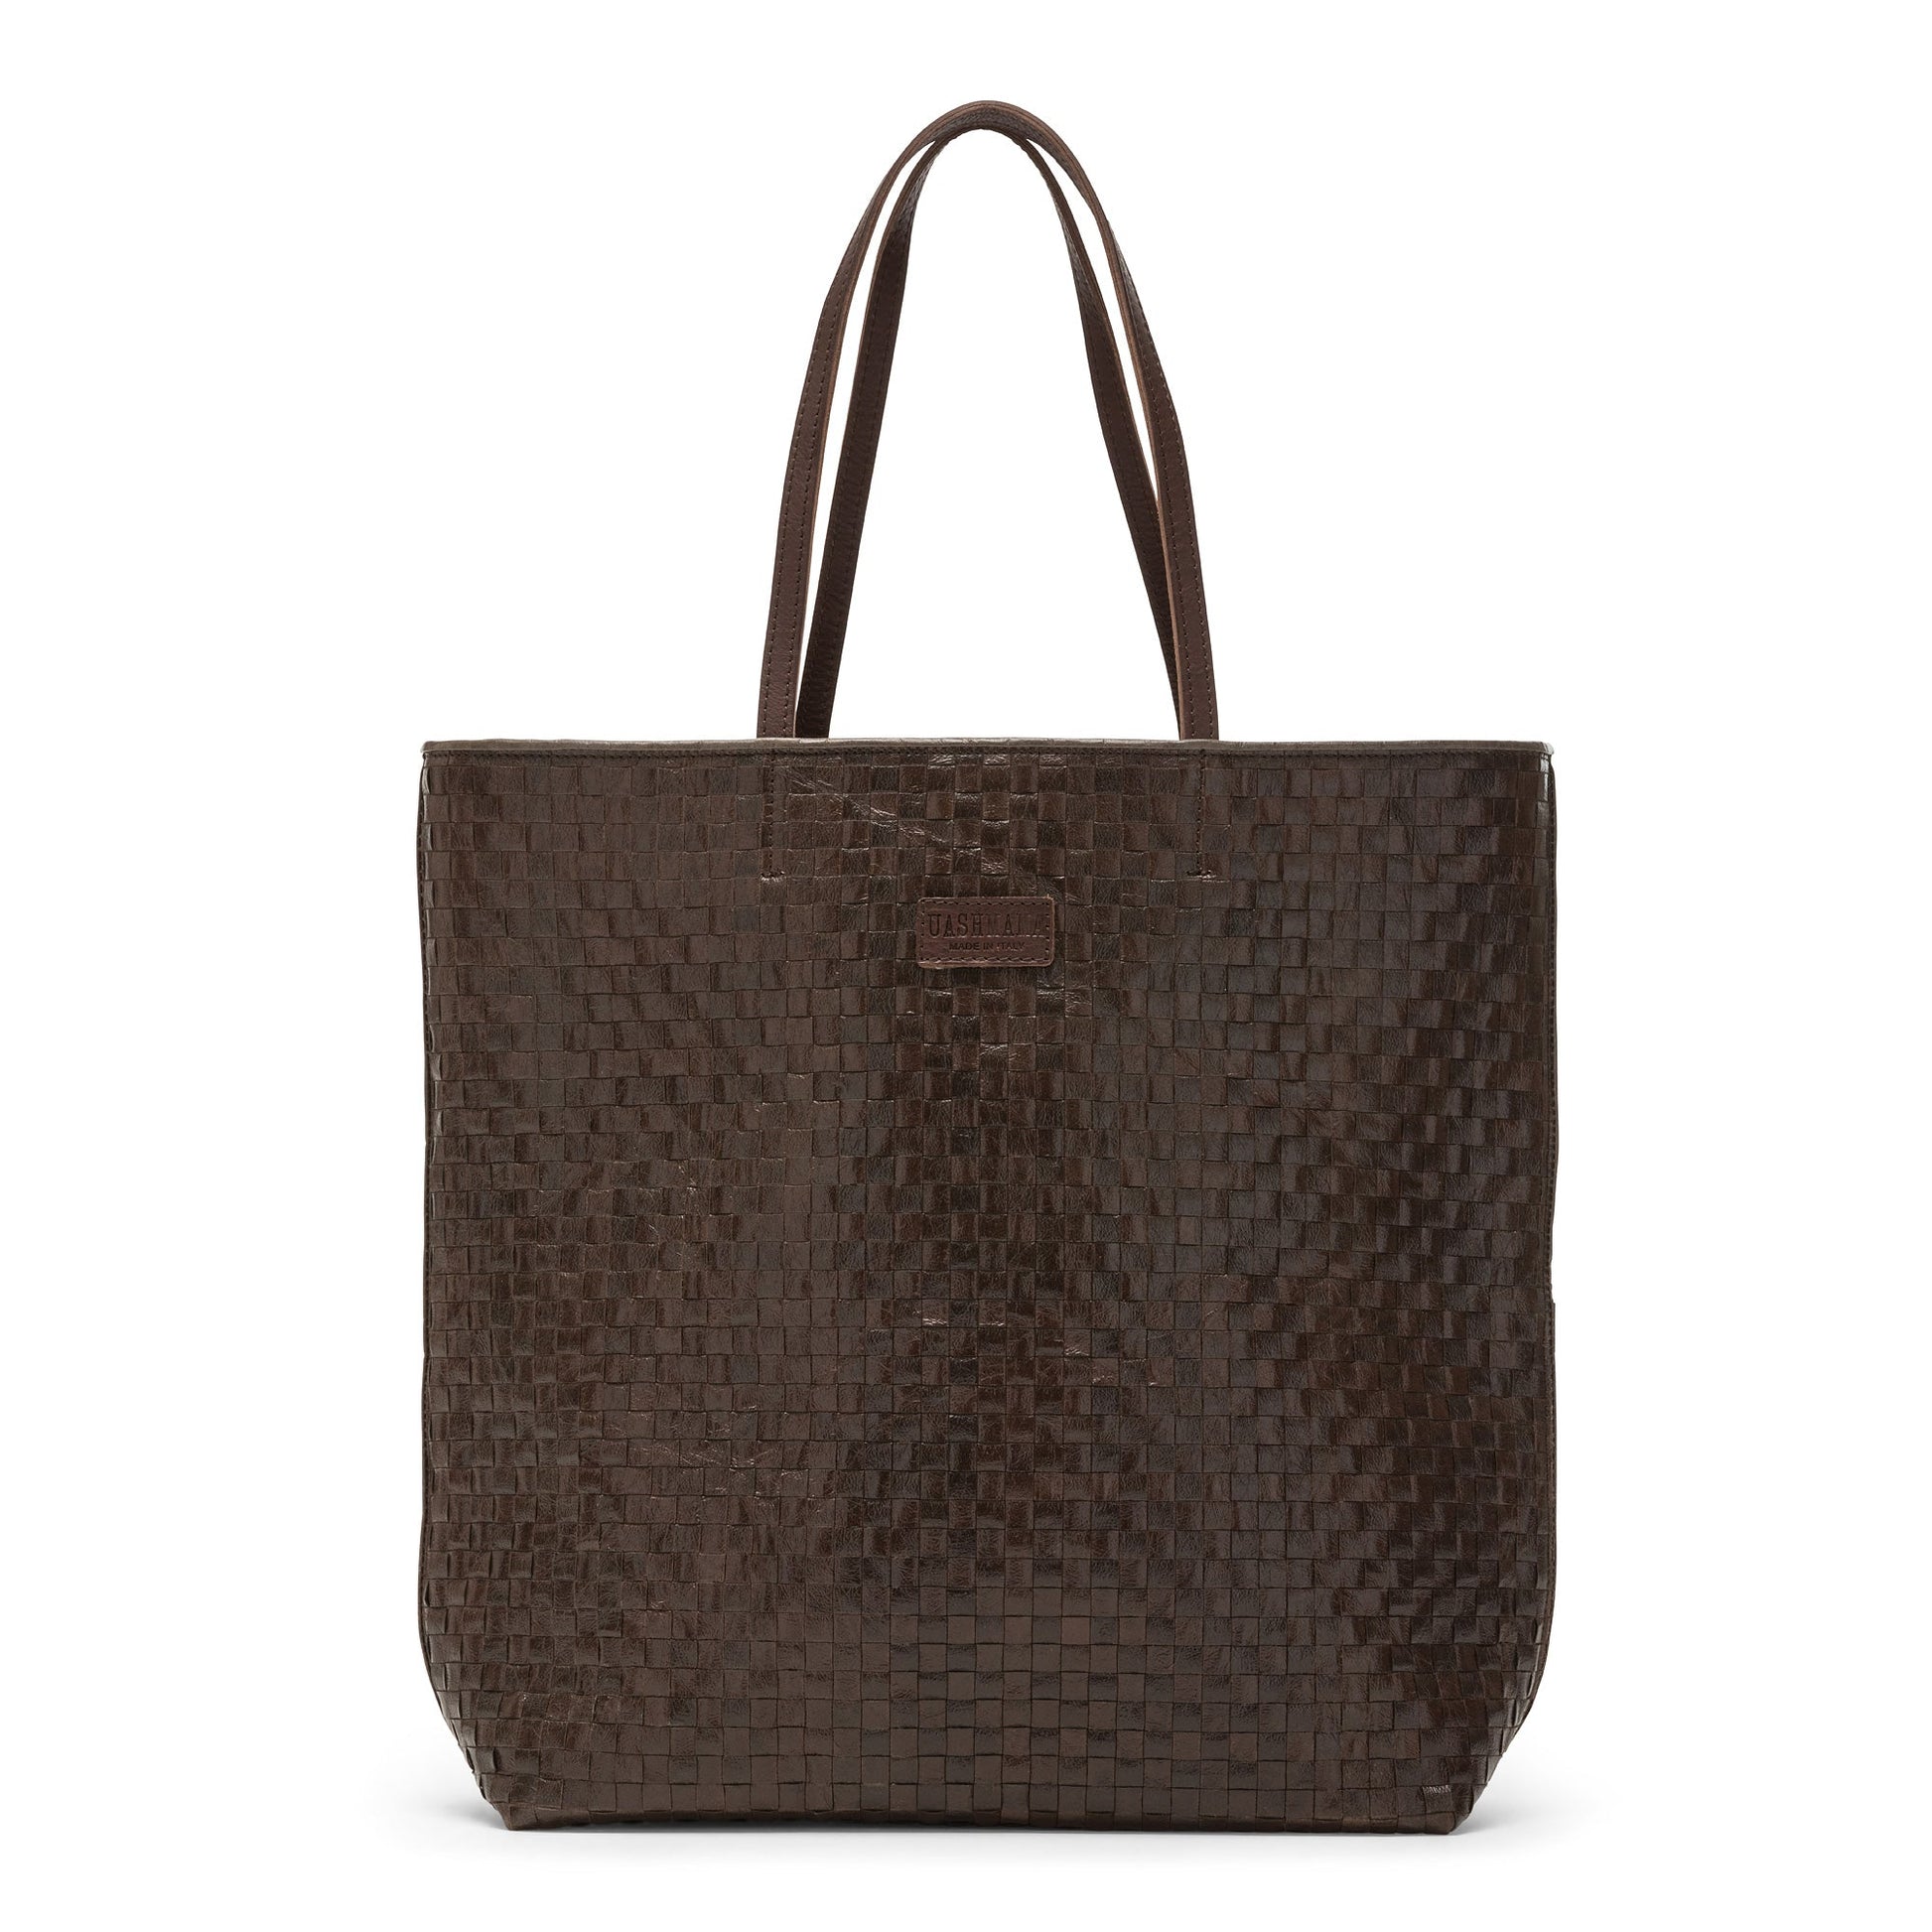 A woven washable paper tote bag is shown. It has two long leather handles and small leather UASHMAMA label on the front. It is shown in a dark brown colour.